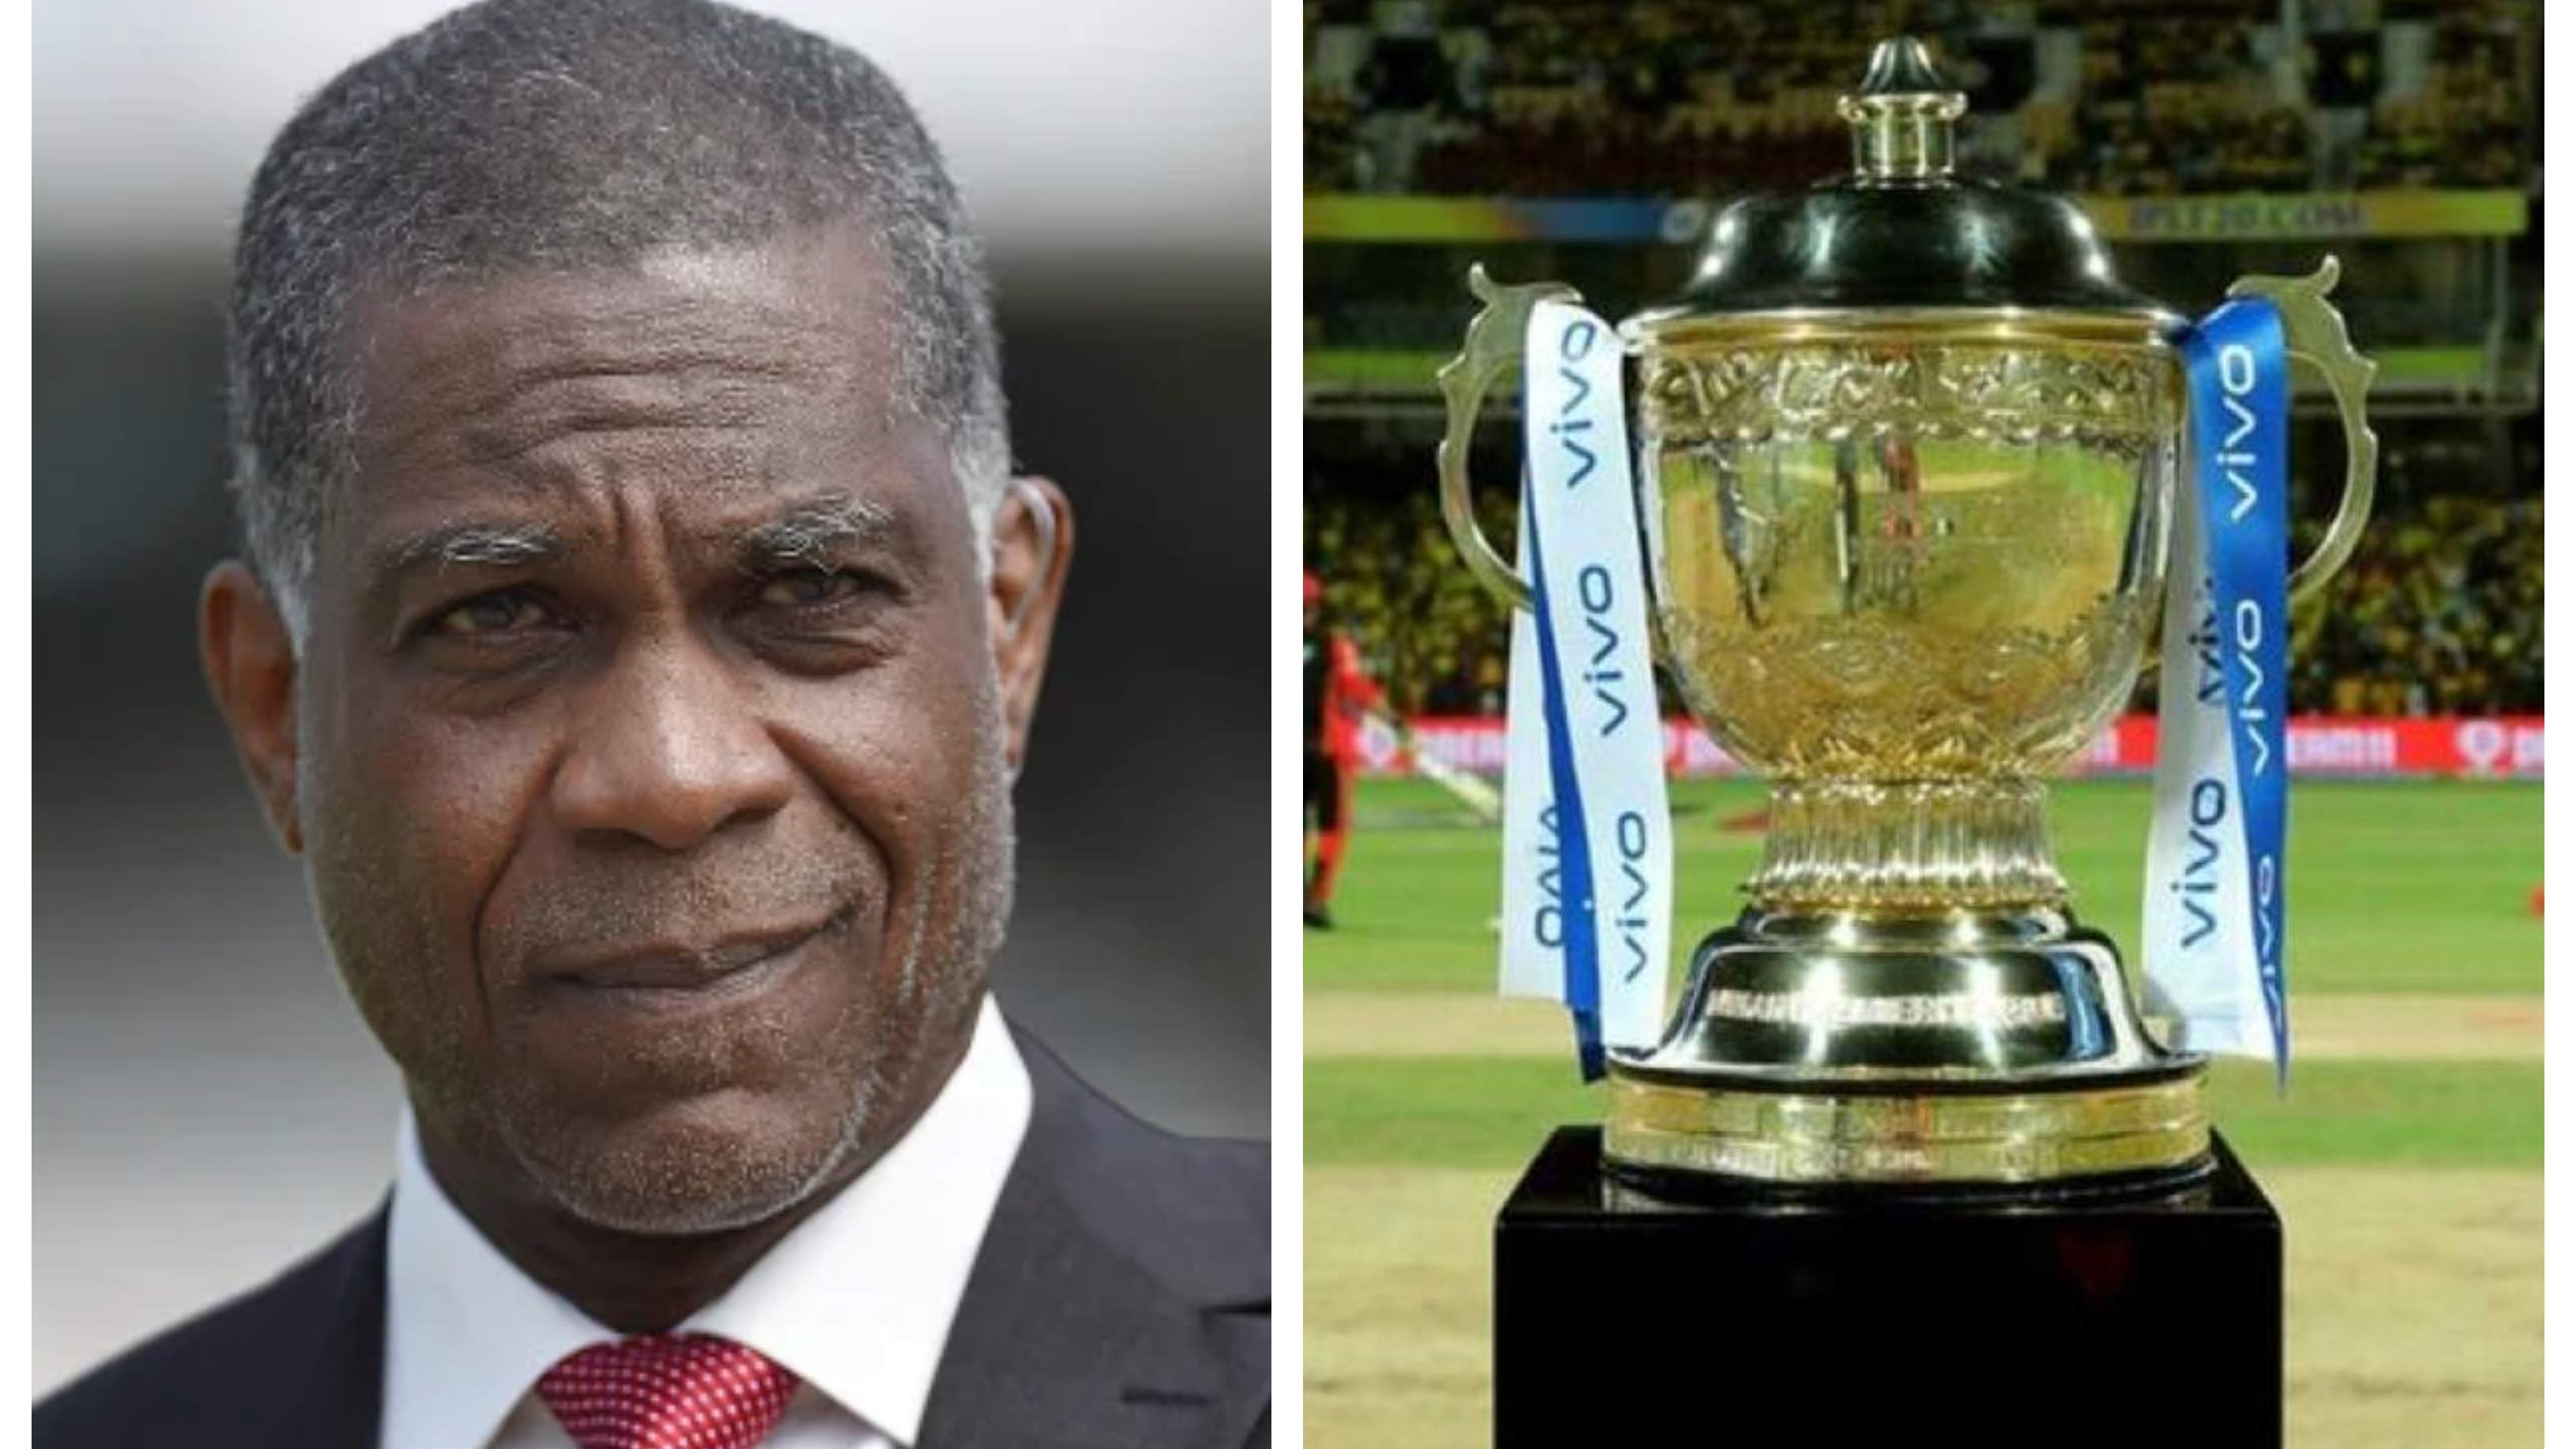 Nothing wrong with BCCI wanting to hold IPL if T20 World Cup is postponed: Michael Holding